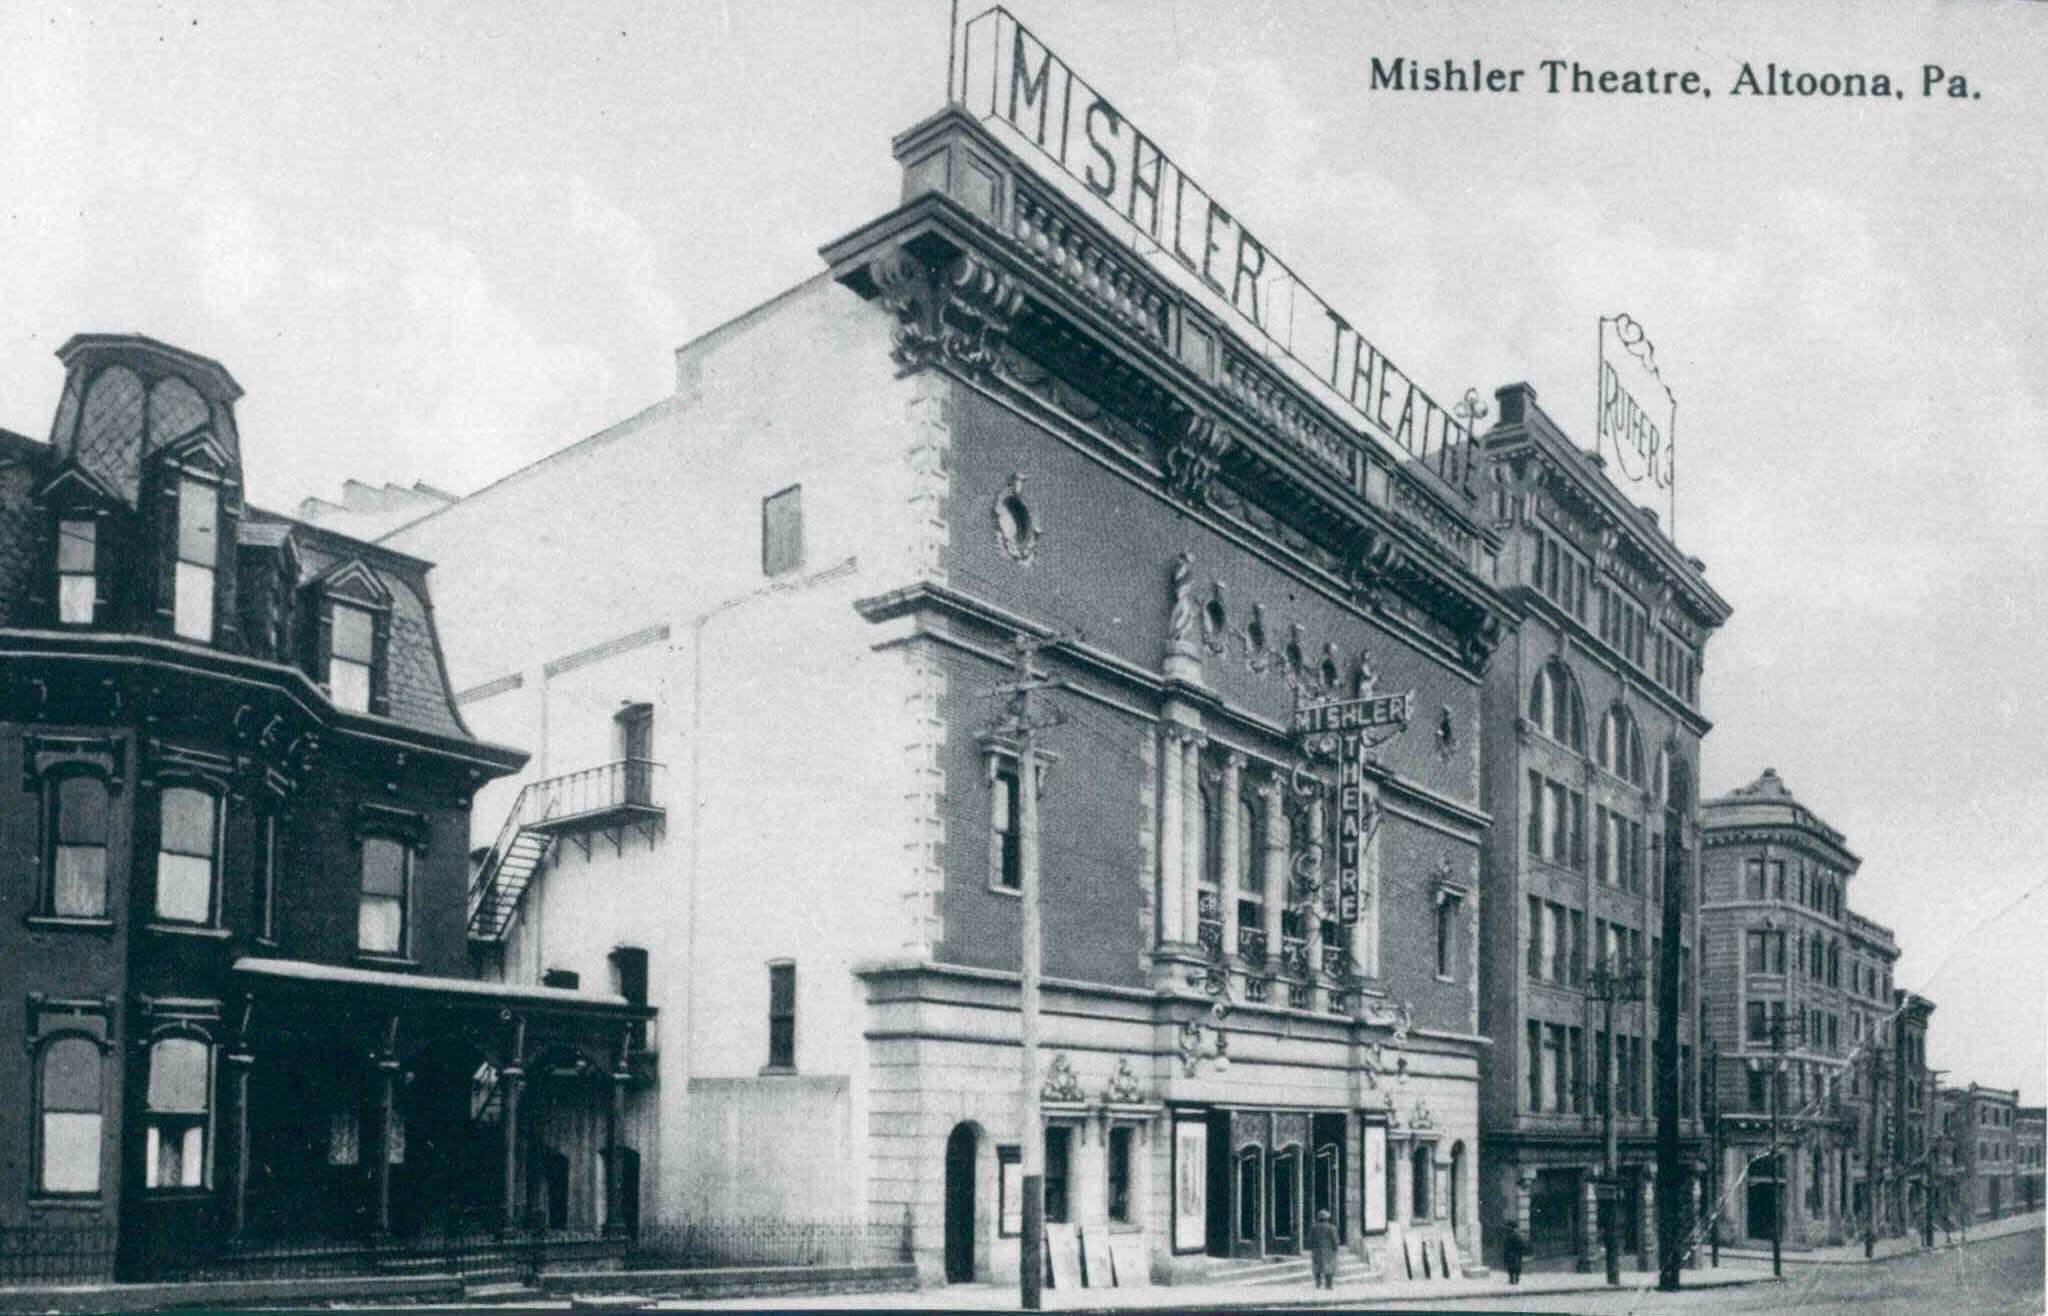 The Mishler Theatre shortly after construction